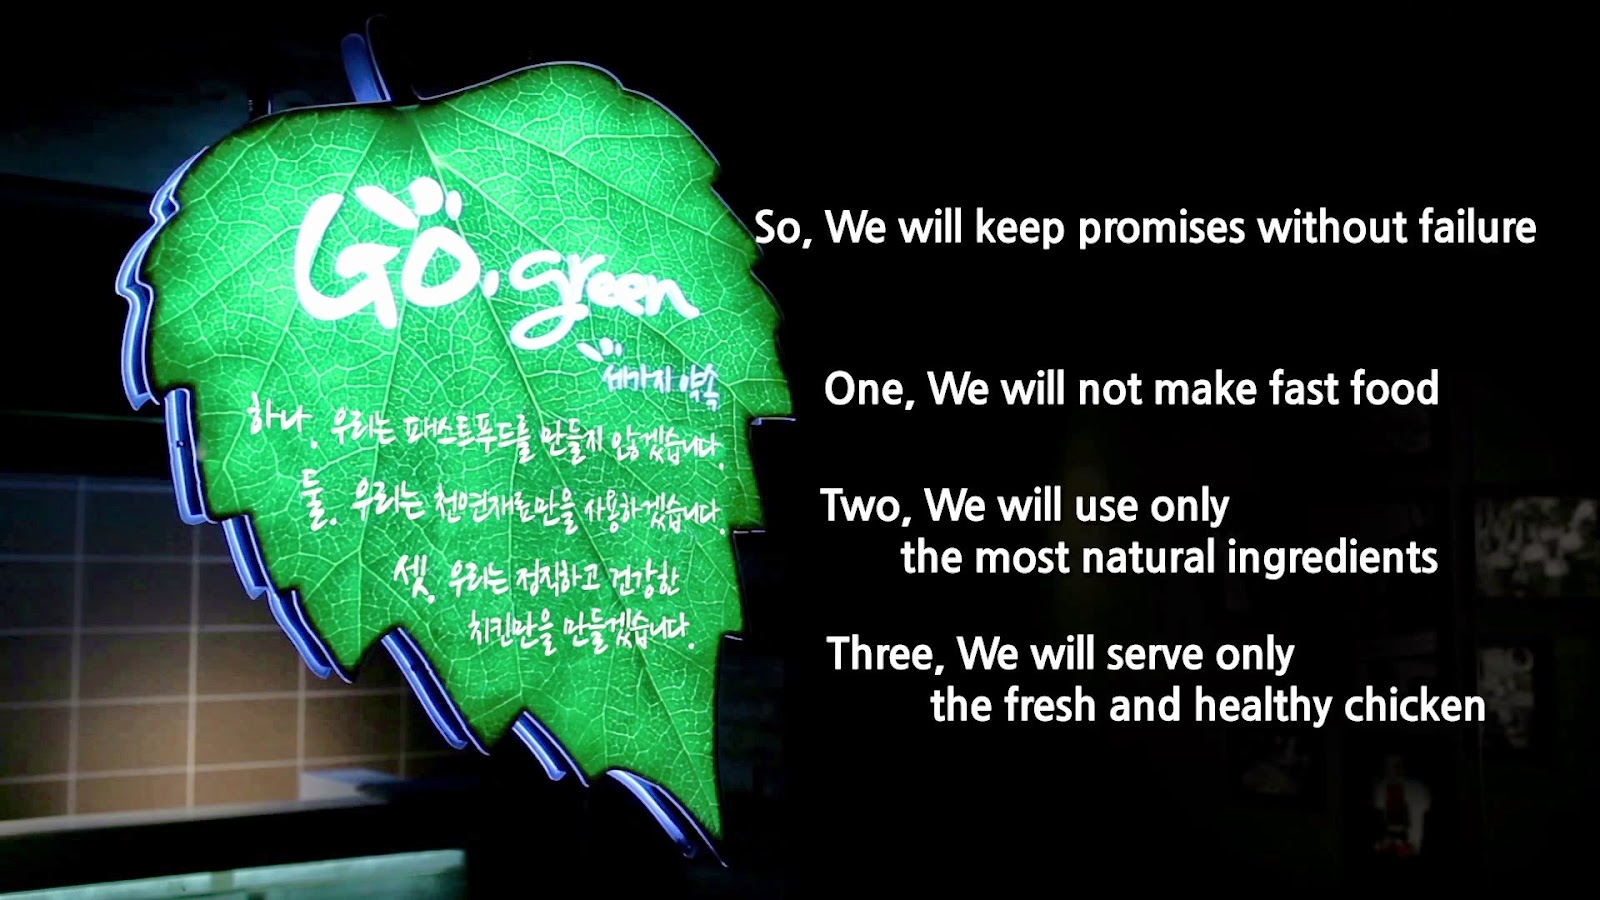 KyoChon's 3 Main Promises to Customers